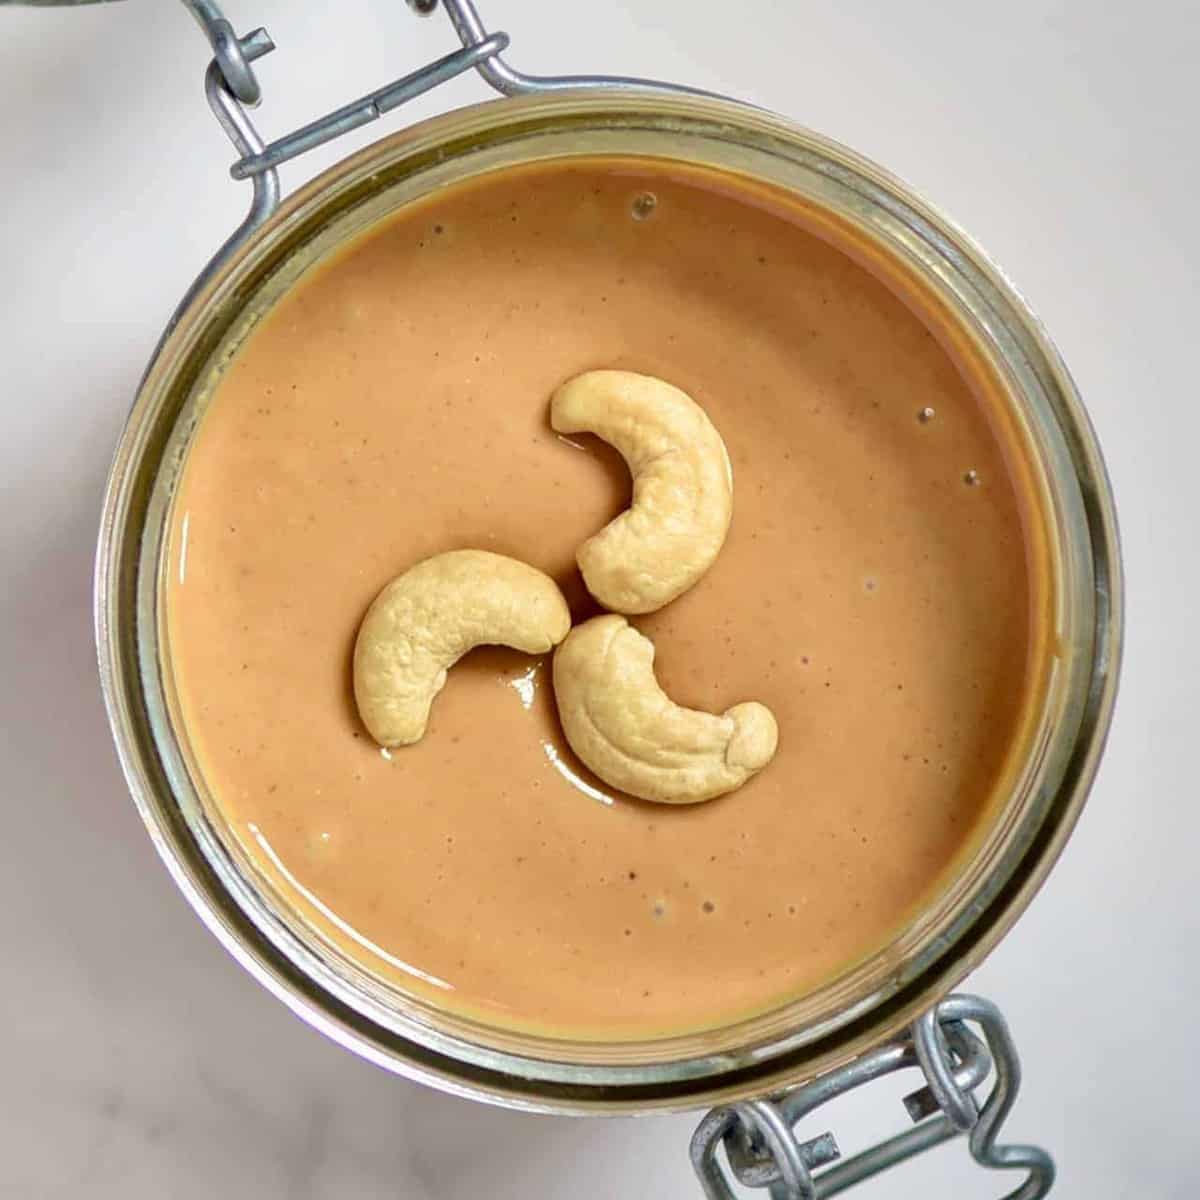 Top view of Cashew Butter and three cashews in a jar